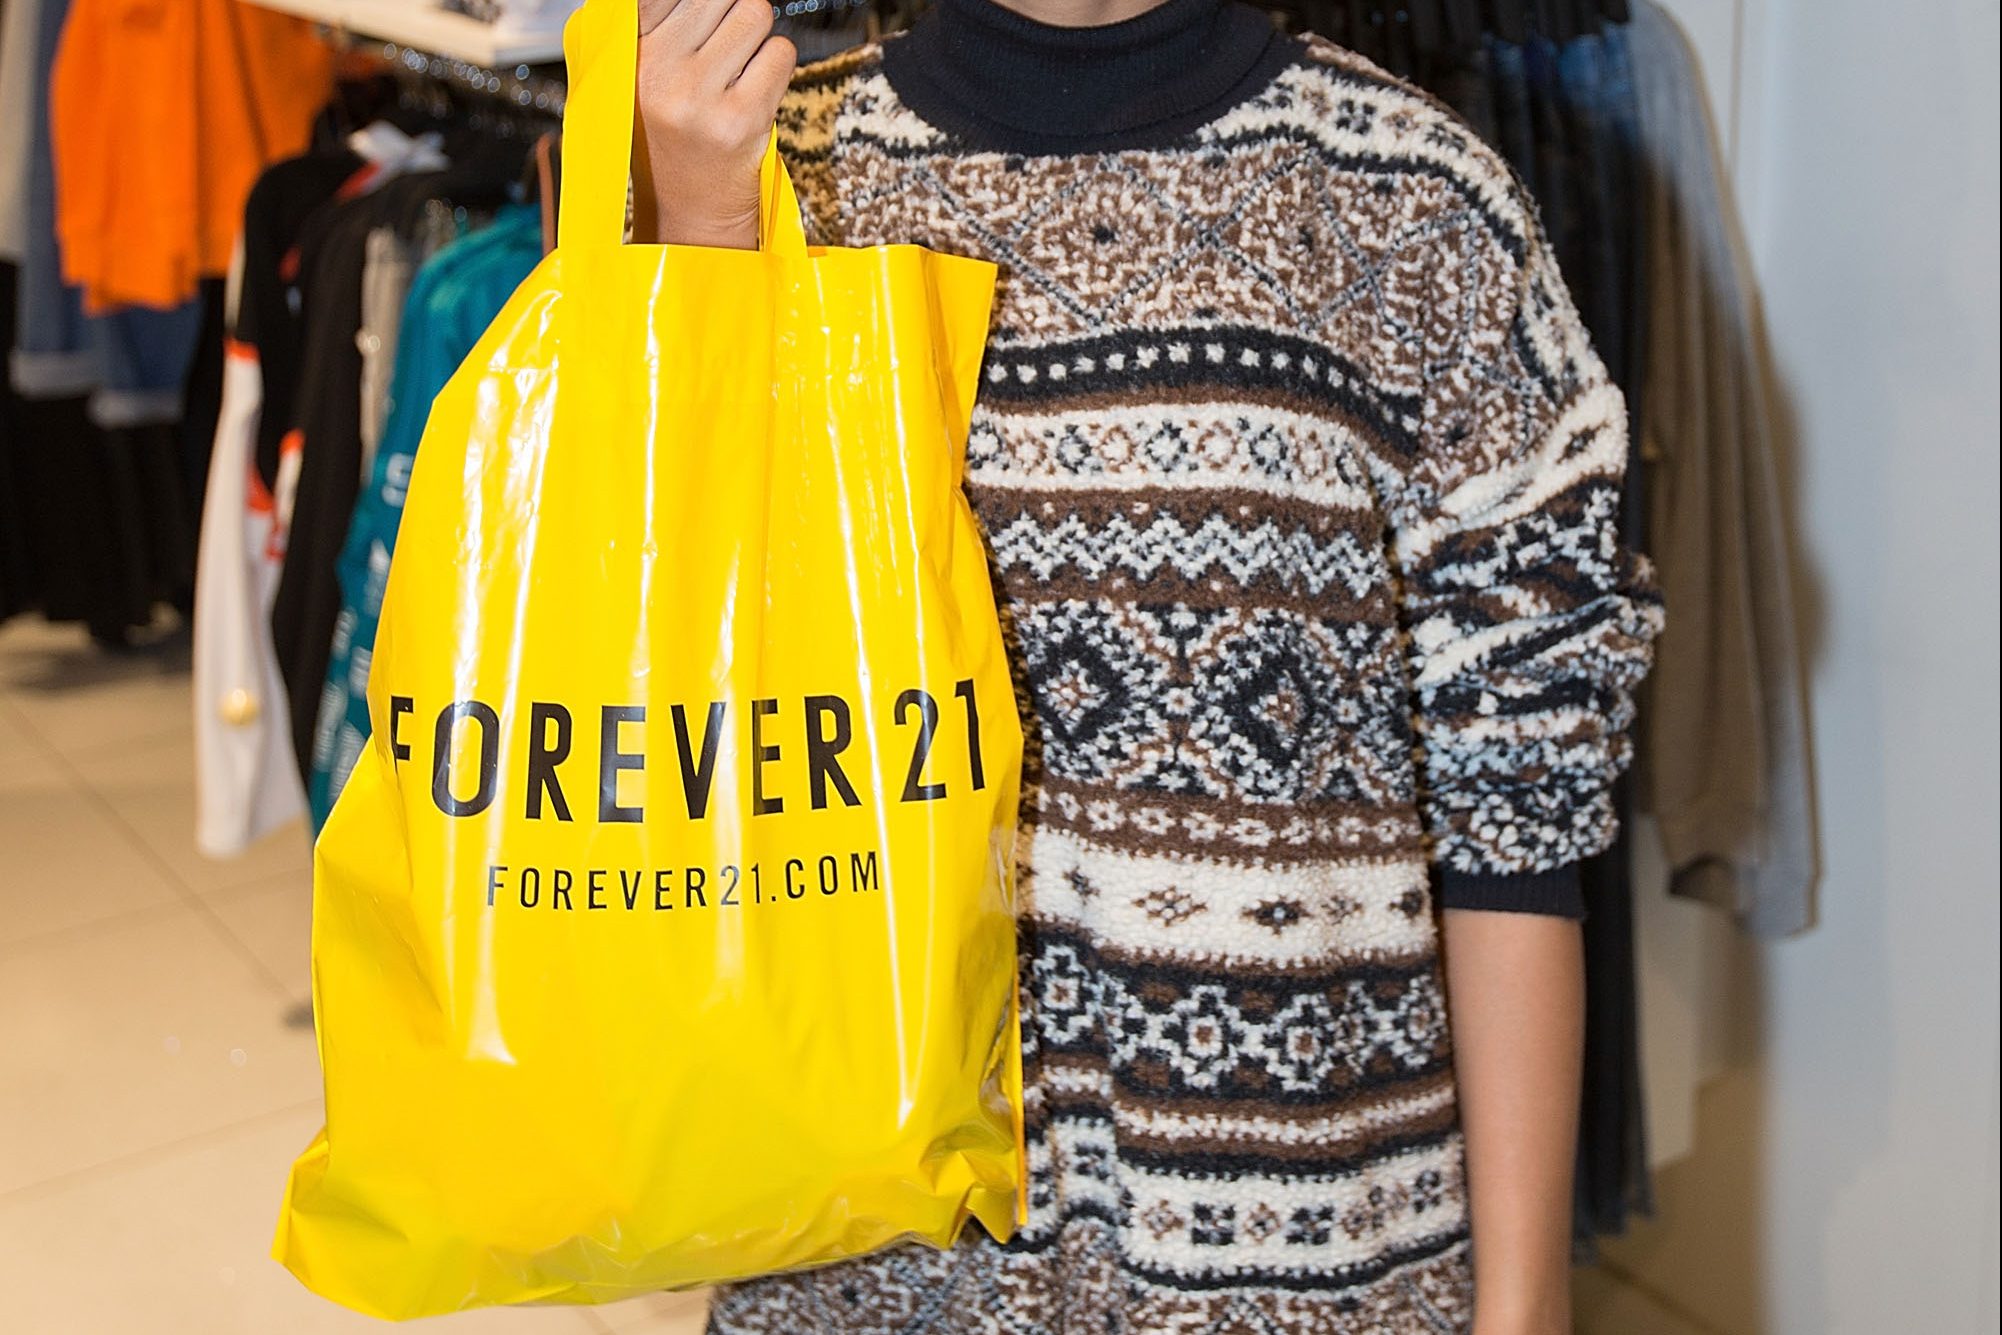 Forever 21 is closing its doors in Canada: Here's what you need to